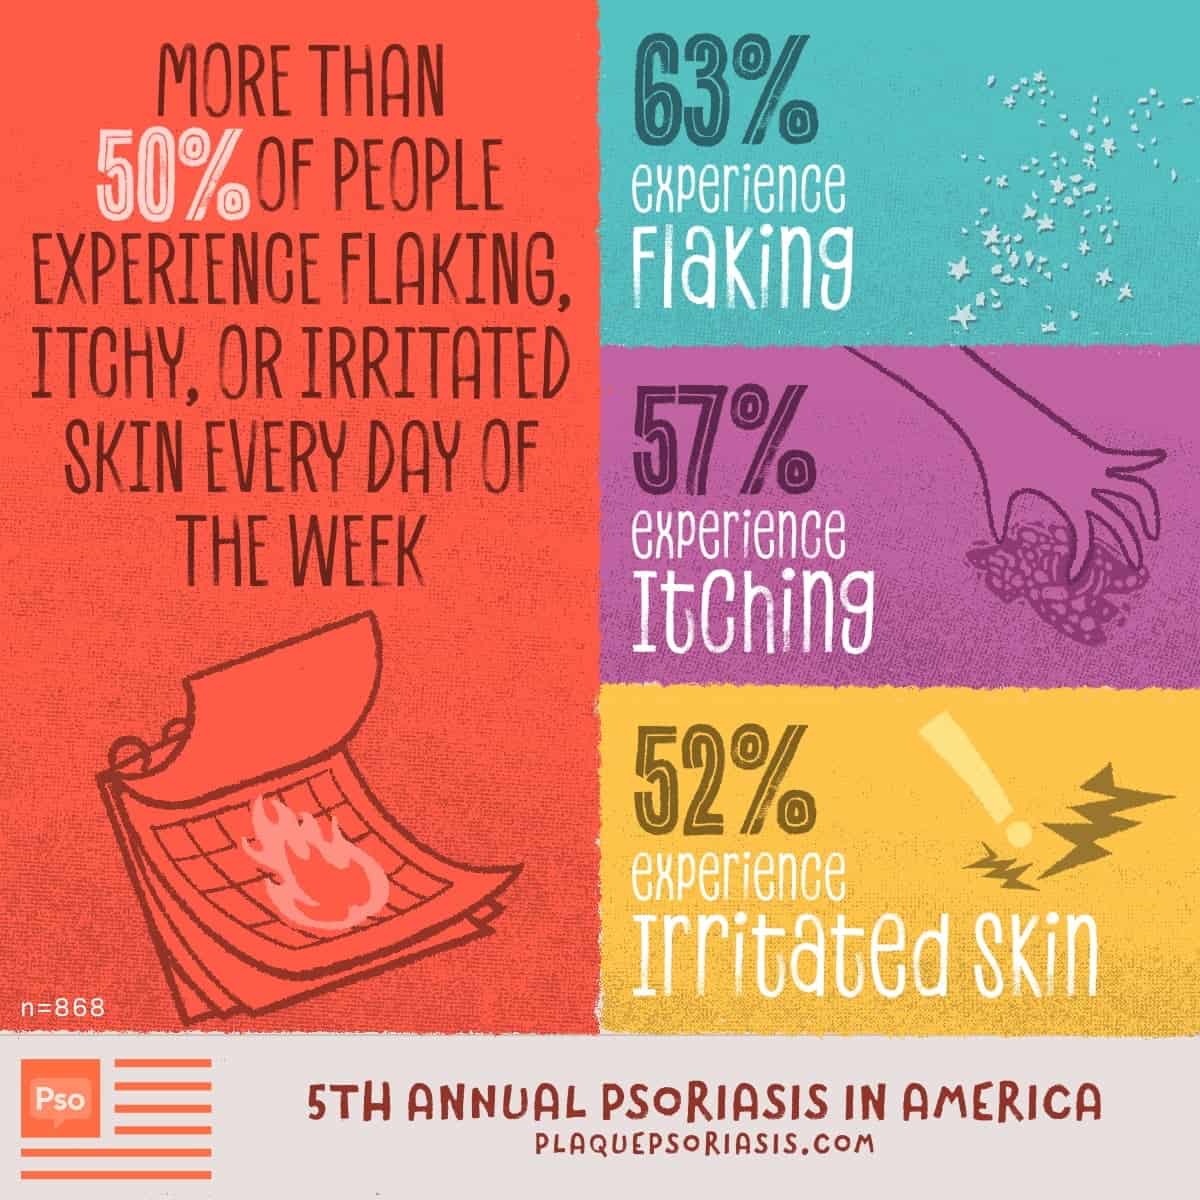 A diagram of psoriasis symptoms including pain, flaking, itching and irritation.